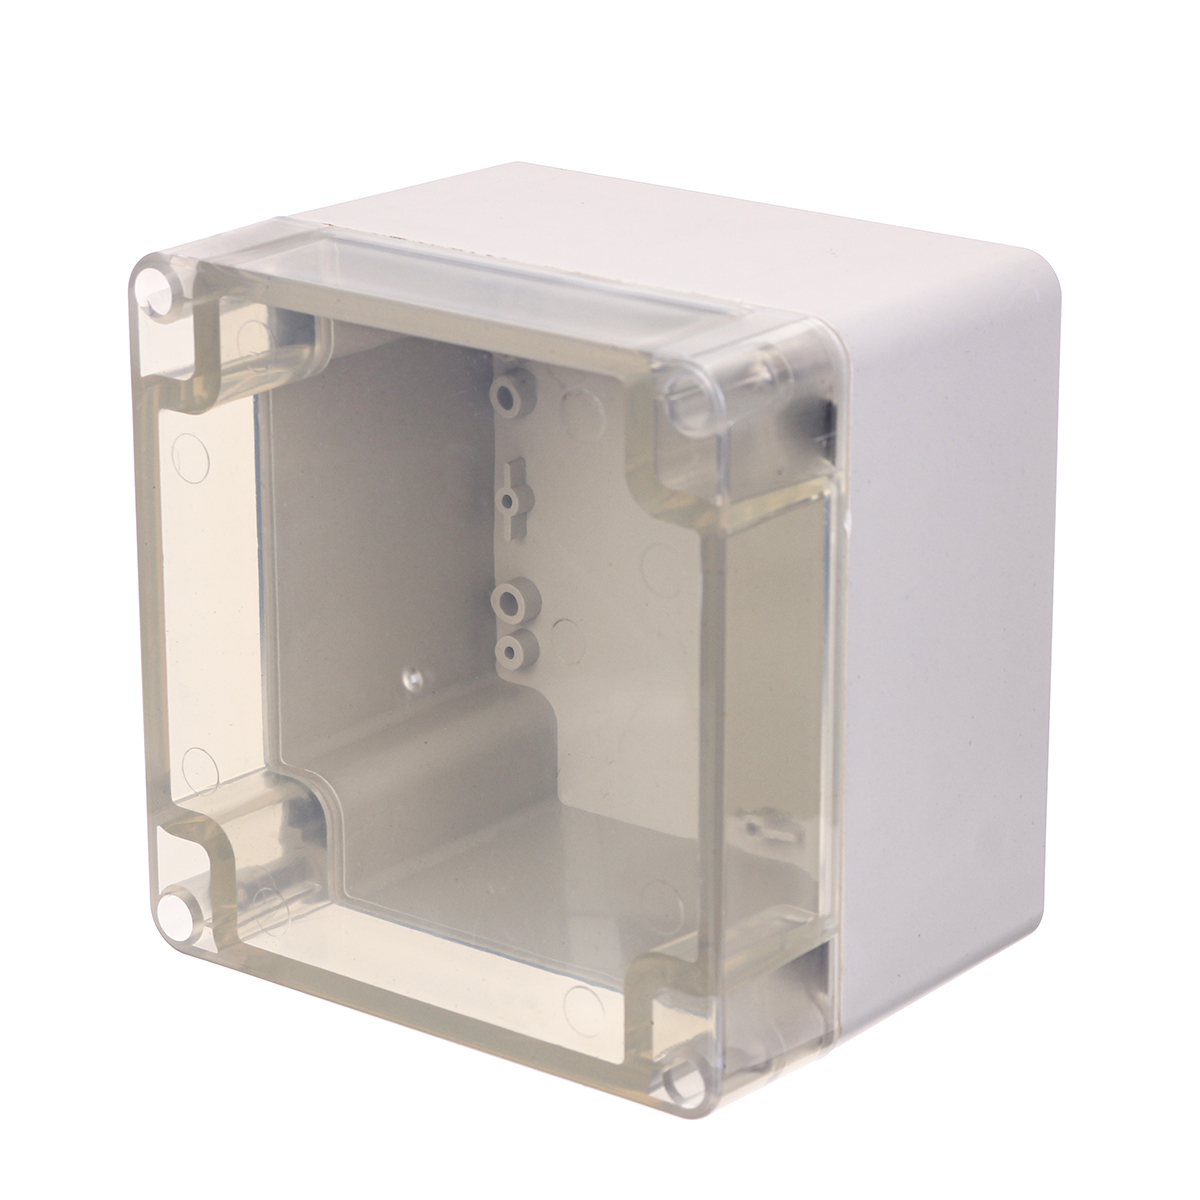 

Plastic Waterproof Electronic Project Box Clear Enclosure Cover Electronic Project Case 120*120*90mm